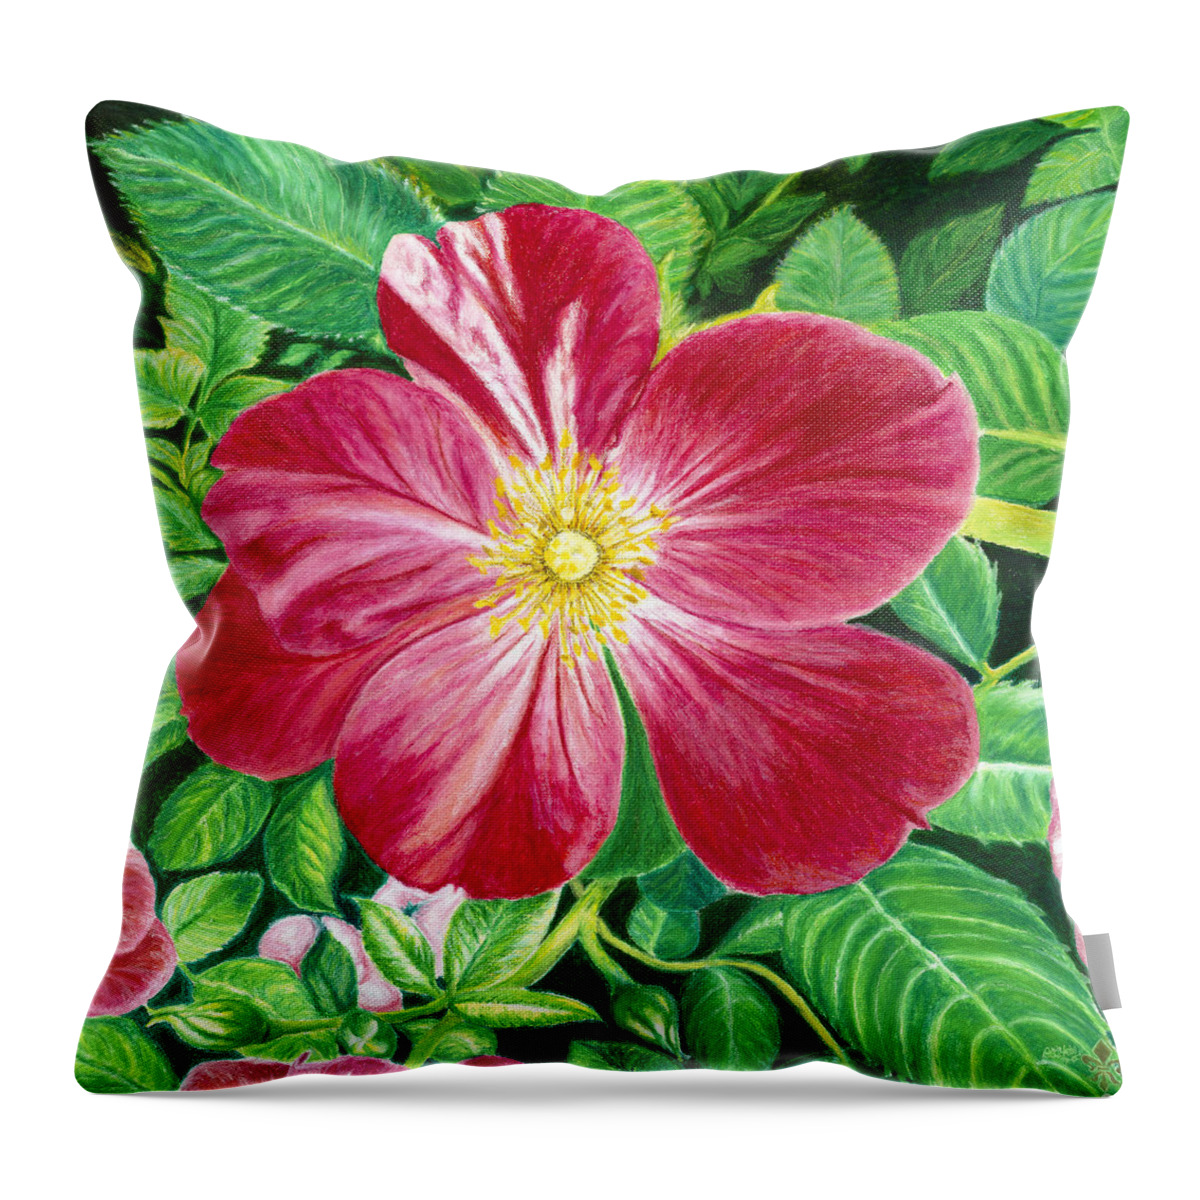 Donna Yates Artist Throw Pillow featuring the painting The Christmas Rose by Donna Yates